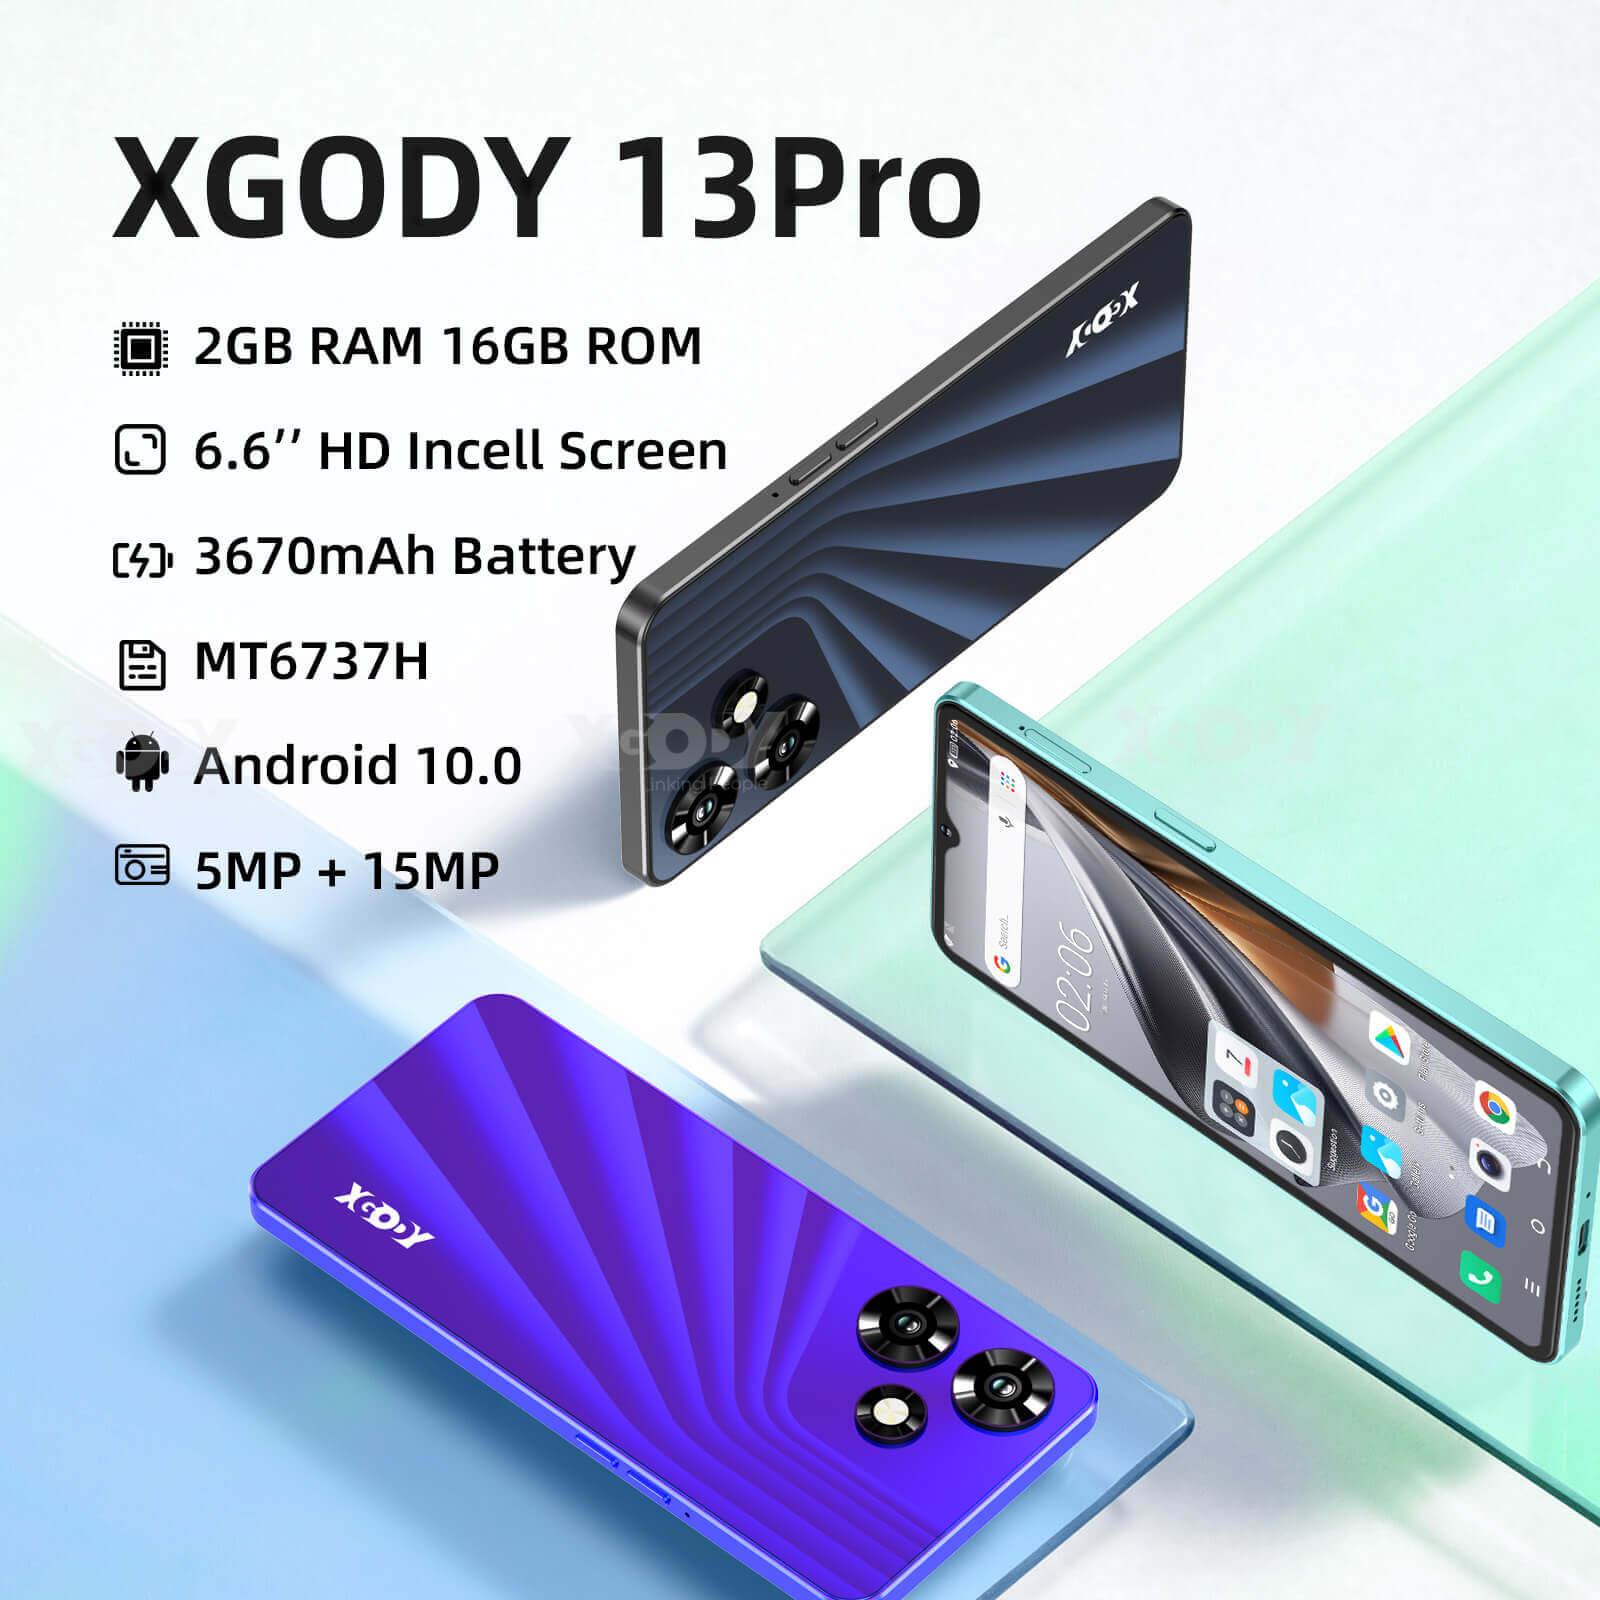 Cost-effective and Most worthwhile XGODY 13 Pro 6.6" Android 4G LTE Phone With Dual Sim Phones Unlocked And Free Android Phone Case - XGODY 